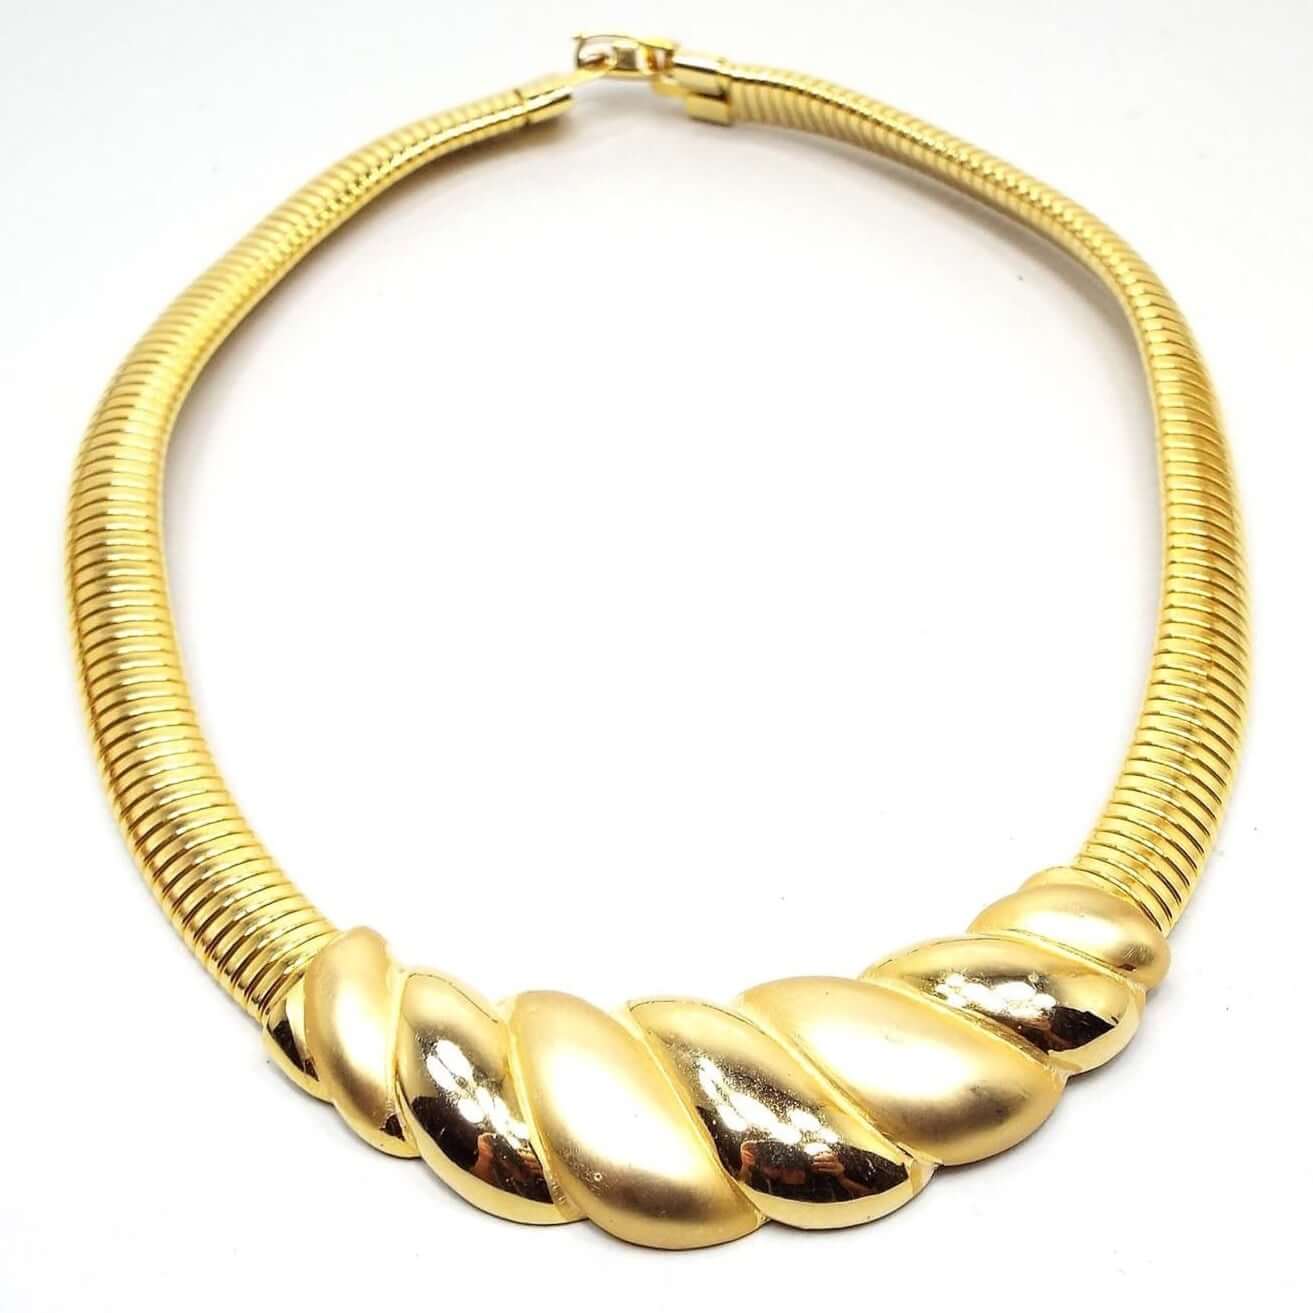 Front view of the retro vintage bib choker necklace. Metal is gold tone in color. Bottom bib part has an angled scalloped style design with alternating matte and shiny metal. Each side has a wide omega chain that has curved linked bars going all the way up to the snap lock clasp.